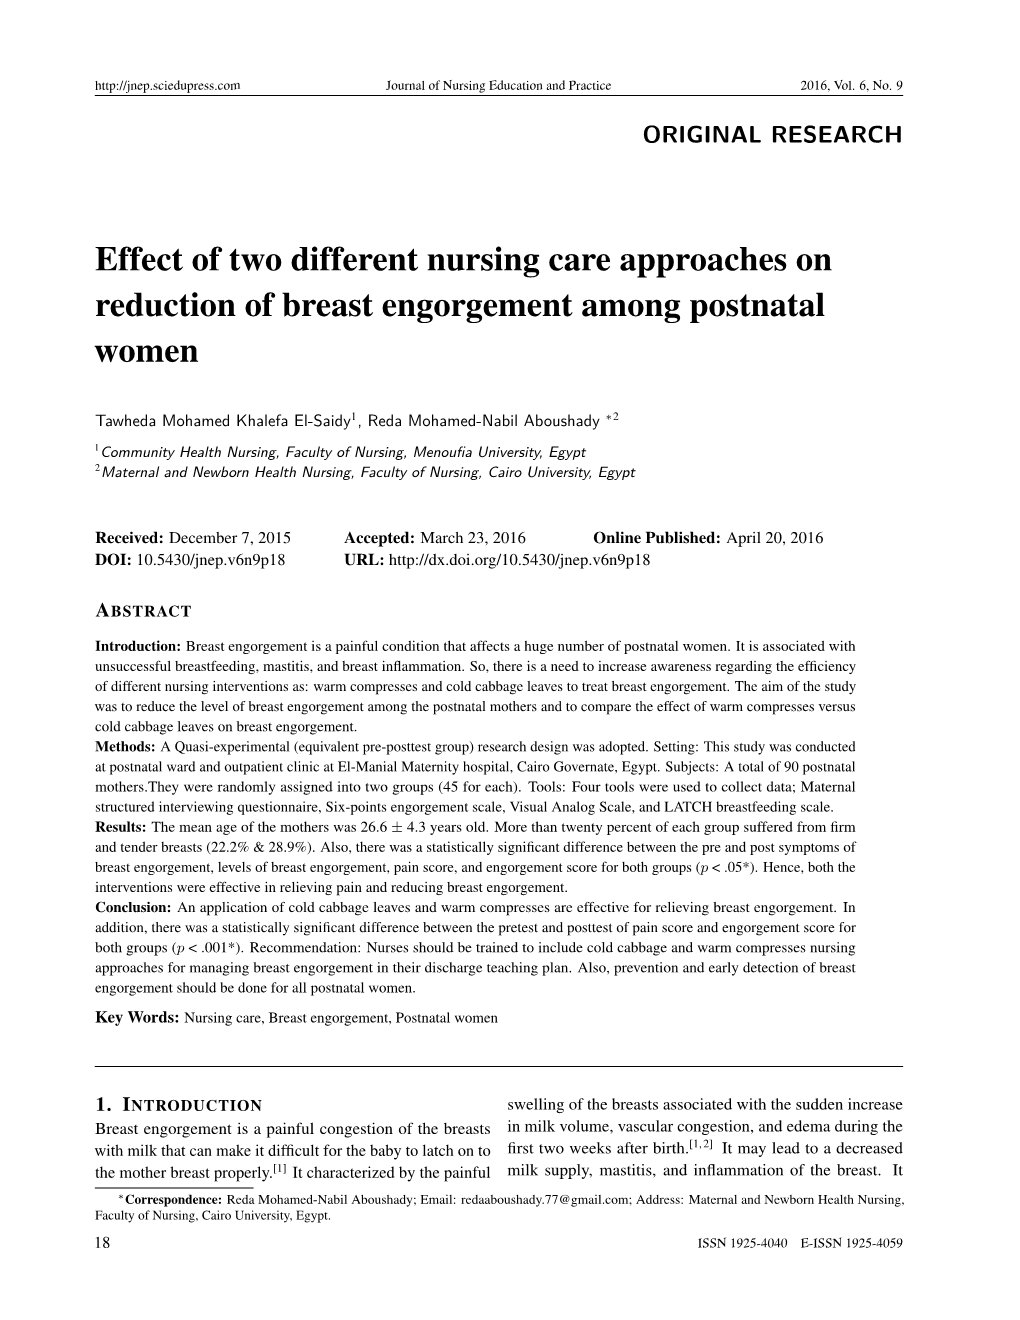 Effect of Two Different Nursing Care Approaches on Reduction of Breast Engorgement Among Postnatal Women